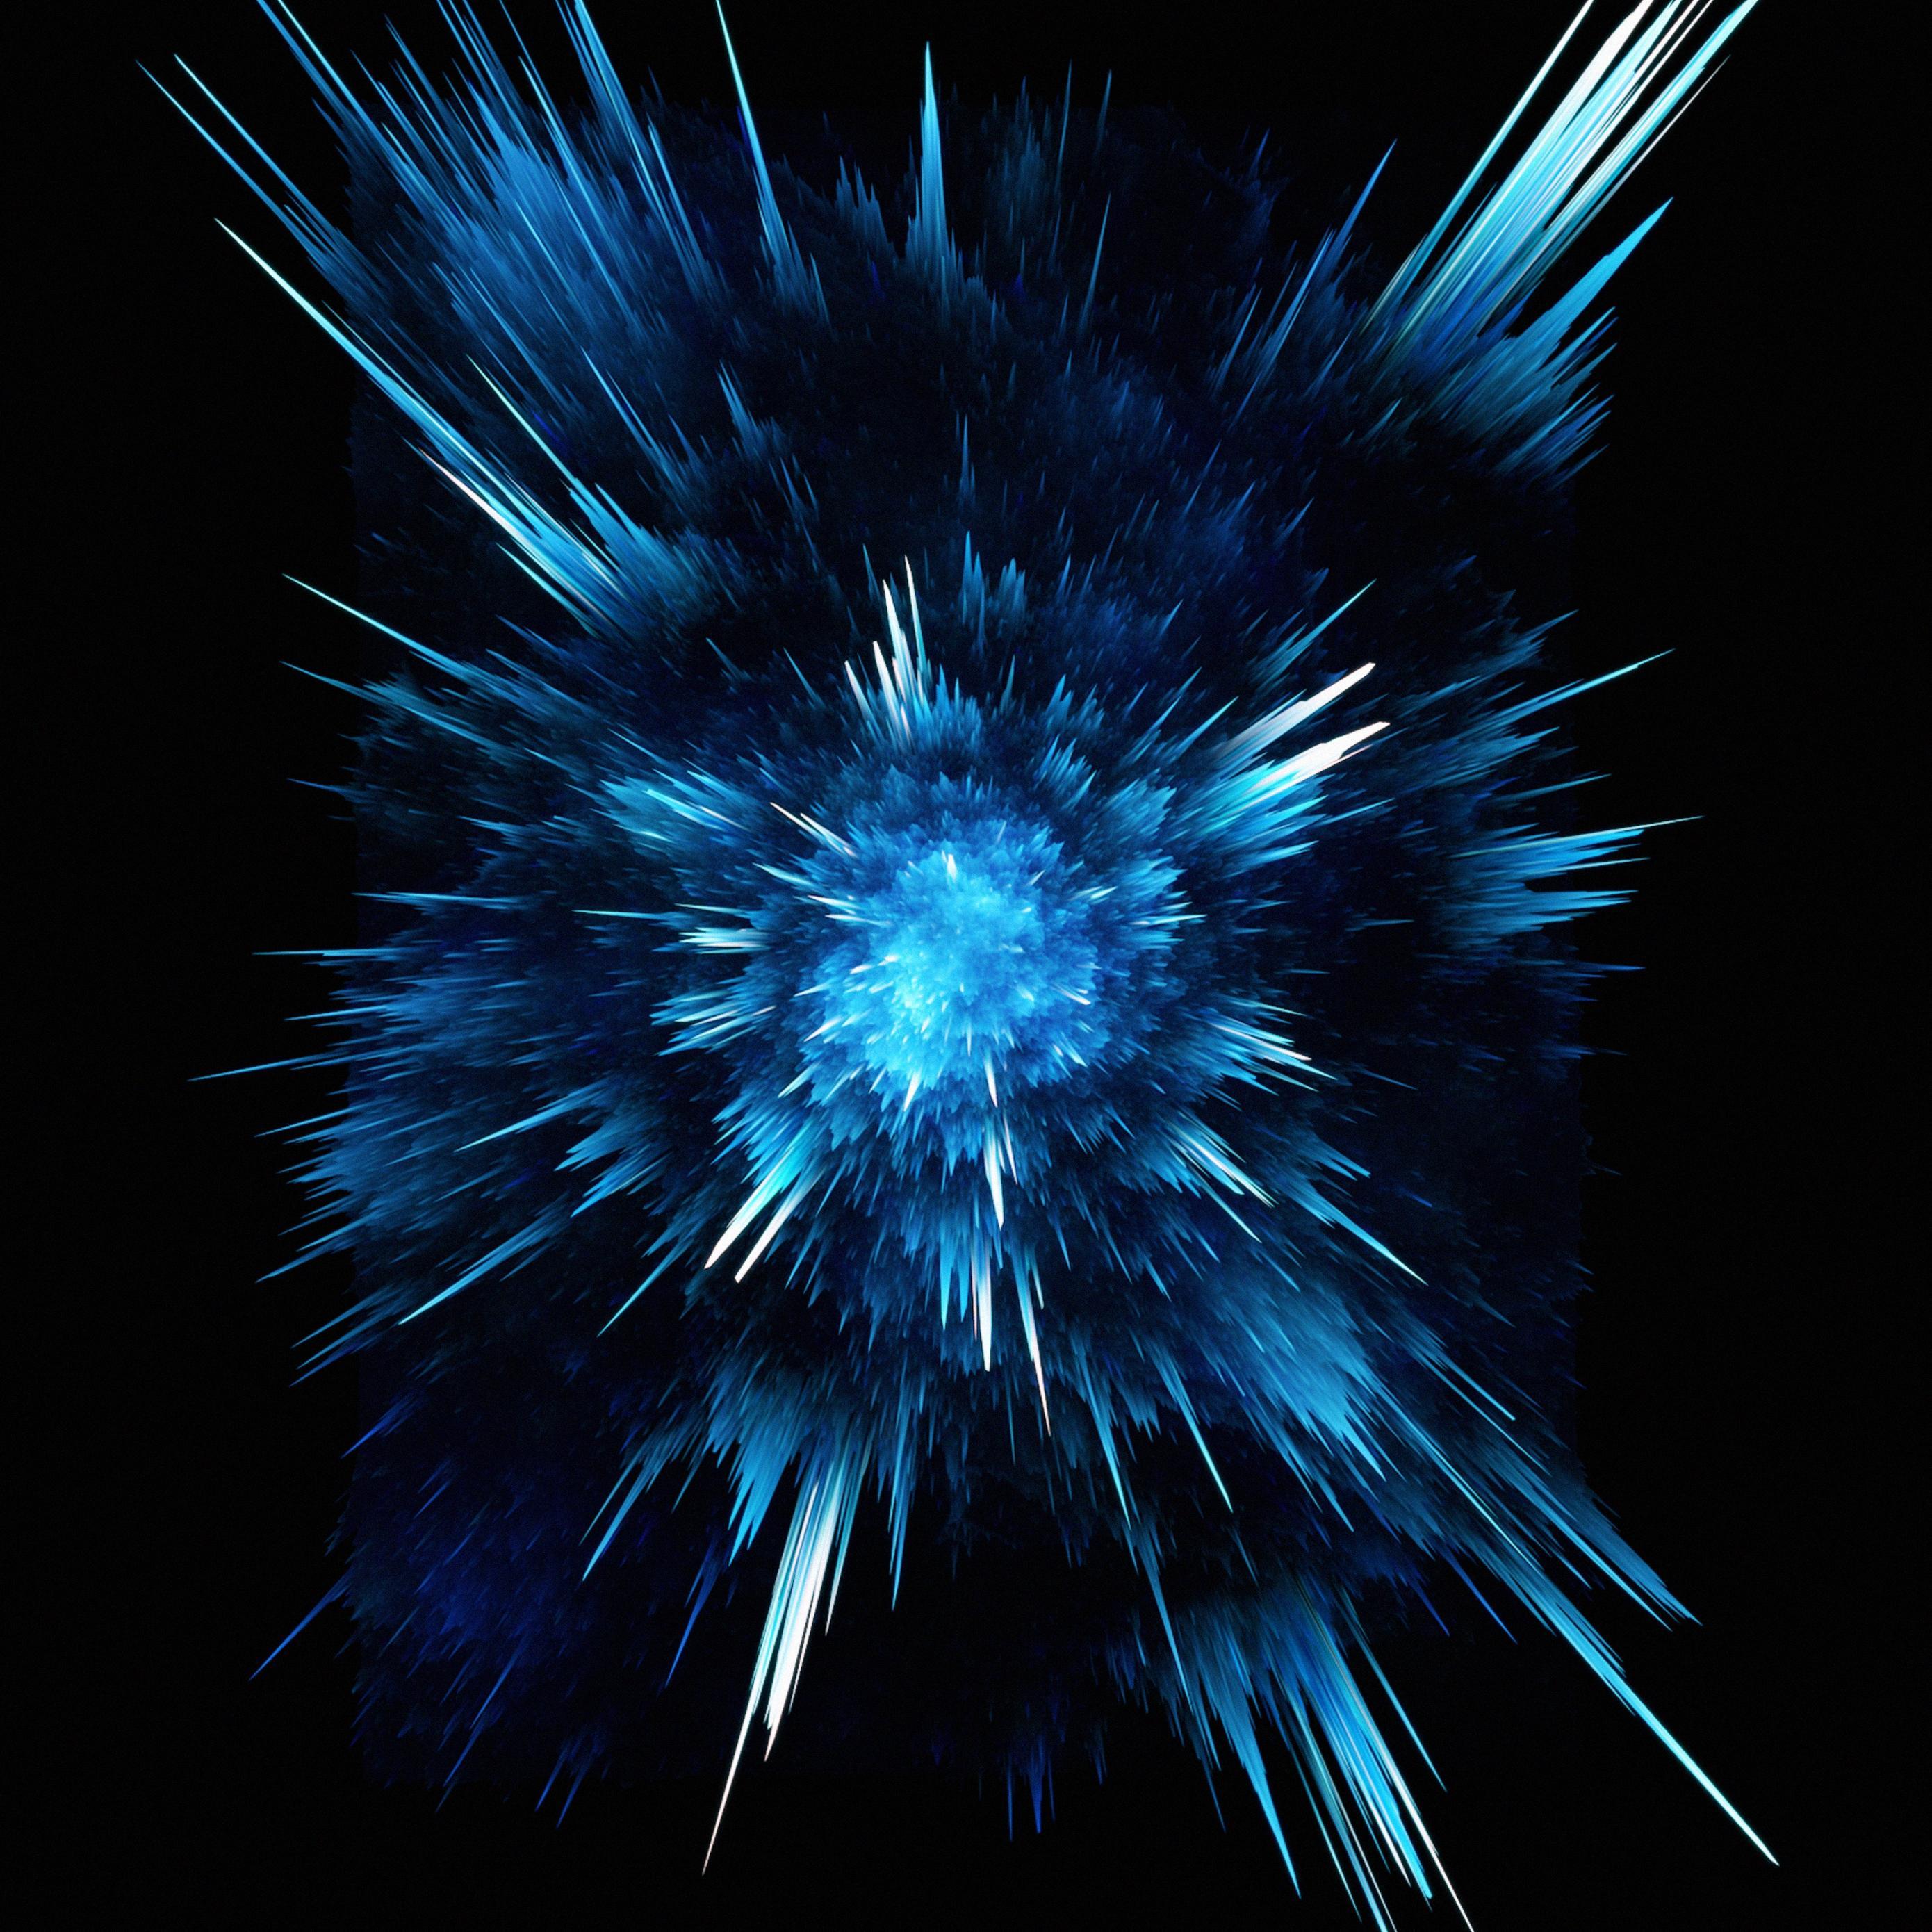 Download wallpaper 2780x2780 abstraction, blue, lines, explosion